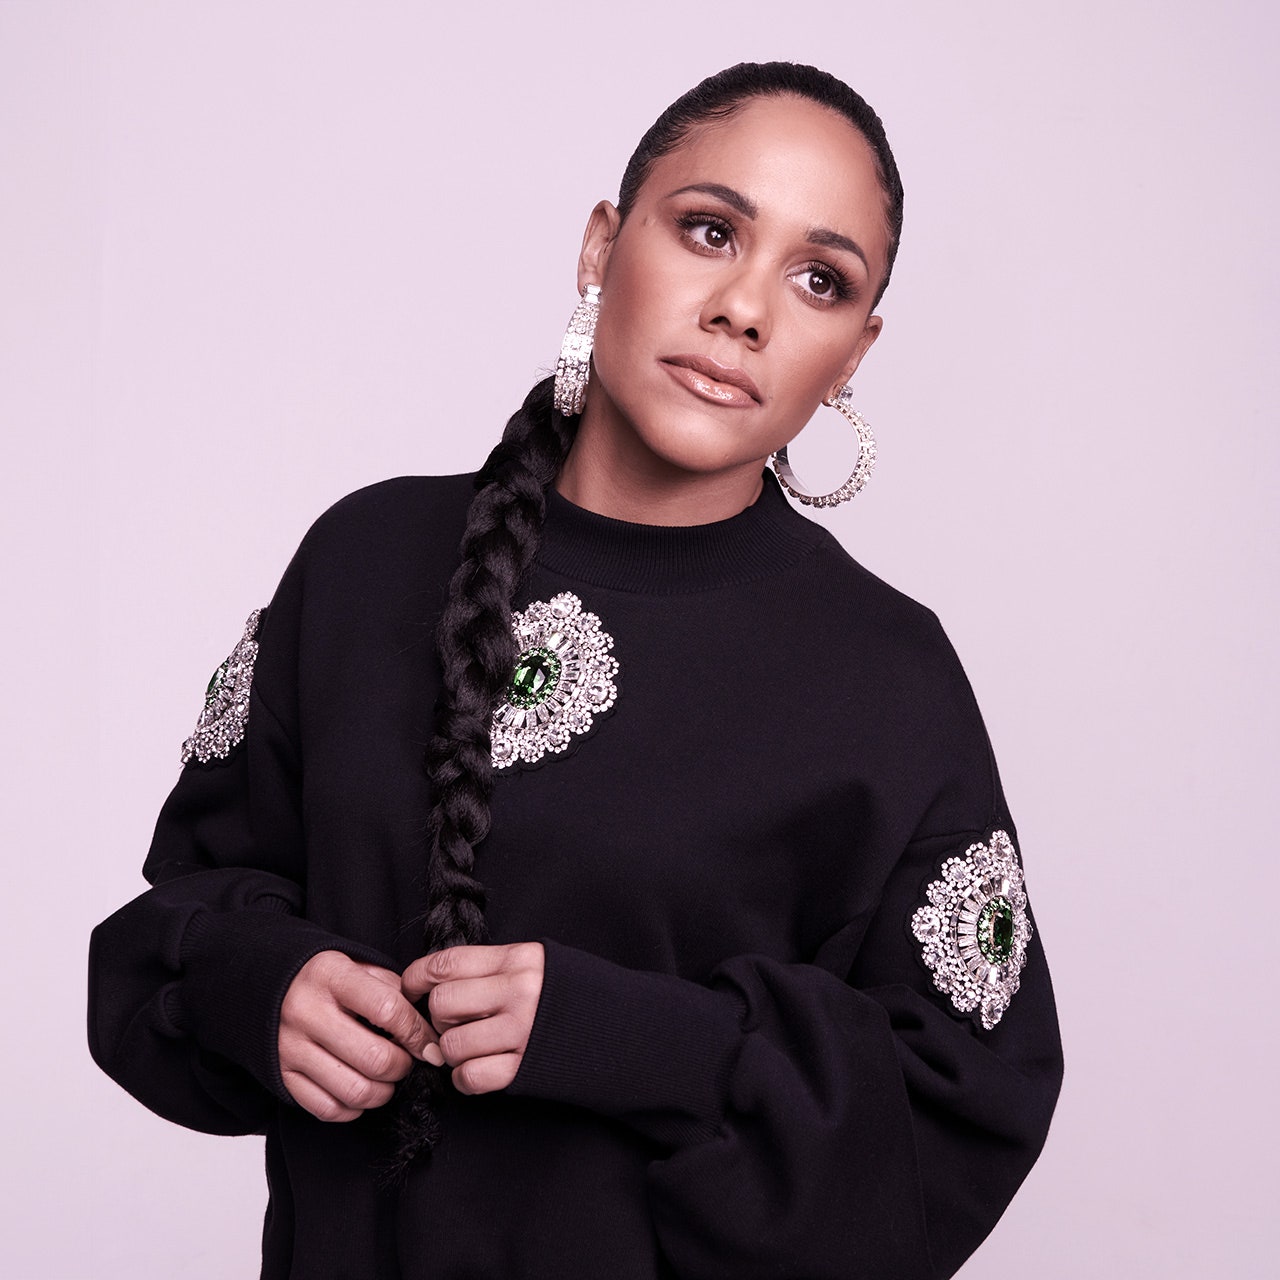 ‘We all need to come together to tackle domestic abuse’: Alex Scott on finding her voice and speaking up for survivors